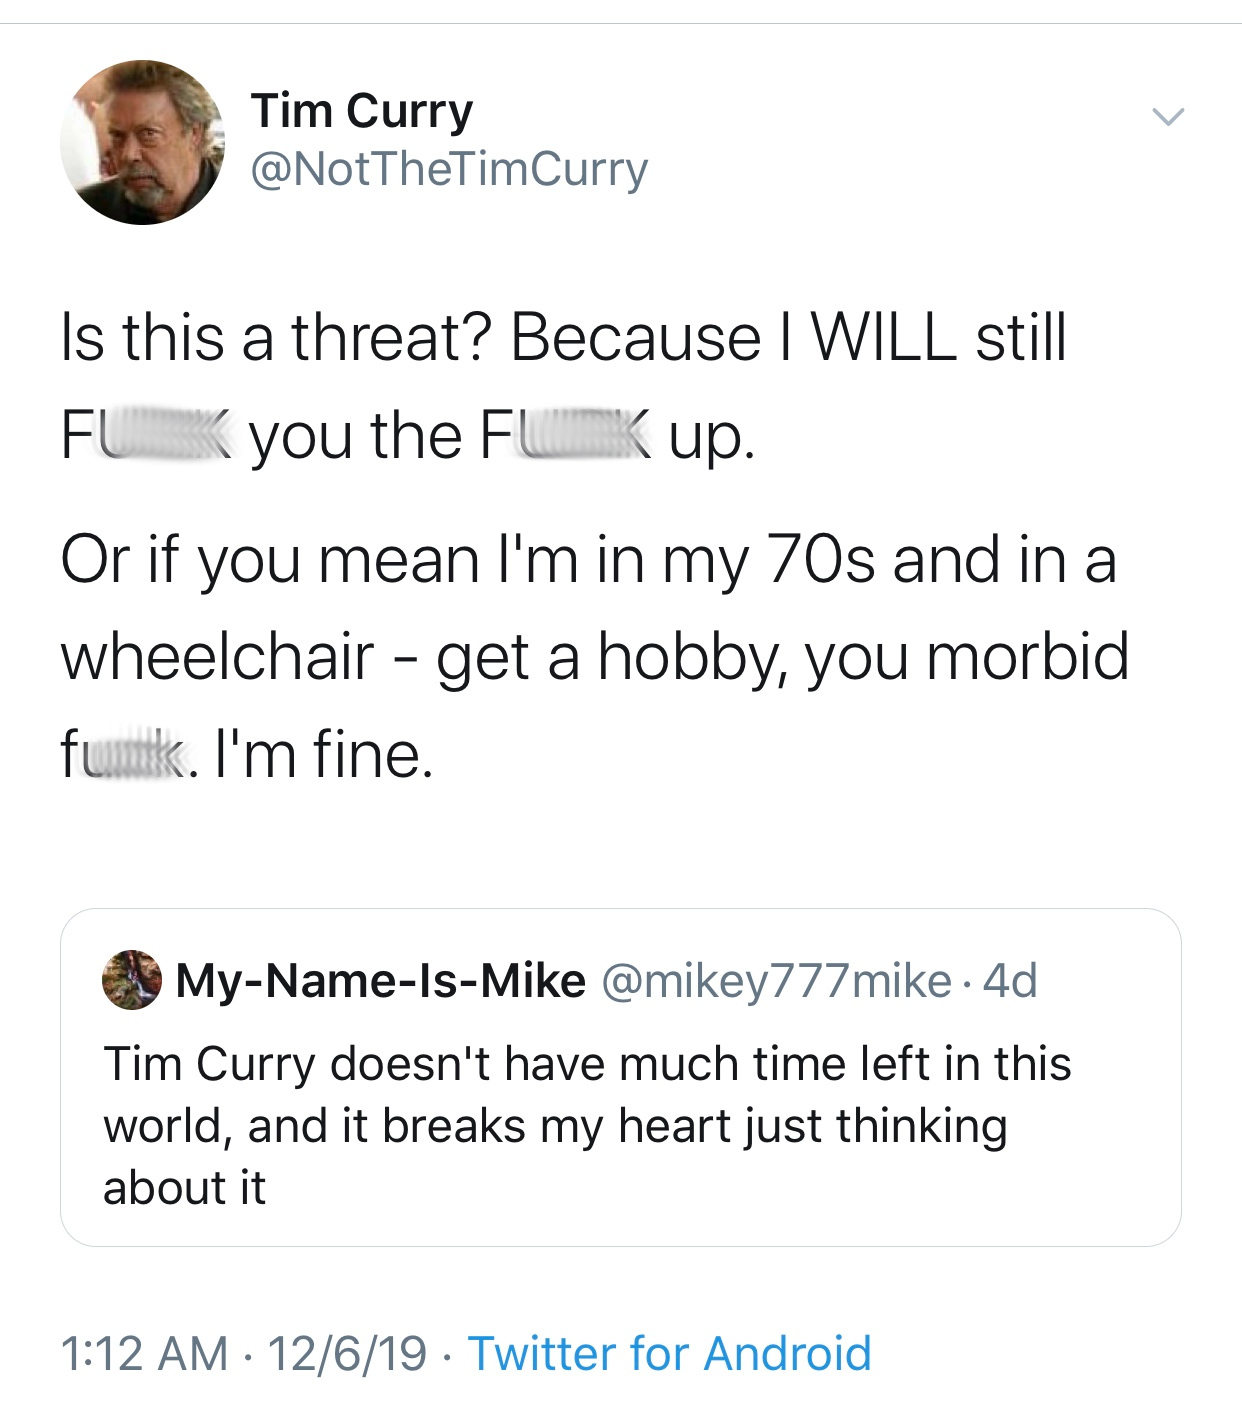 document - Tim Curry Is this a threat? Because I Will still Fuk you the Fuck up. Or if you mean I'm in my 70s and in a wheelchair get a hobby, you morbid funk. I'm fine. MyNameIsMike 4d Tim Curry doesn't have much time left in this world, and it breaks my